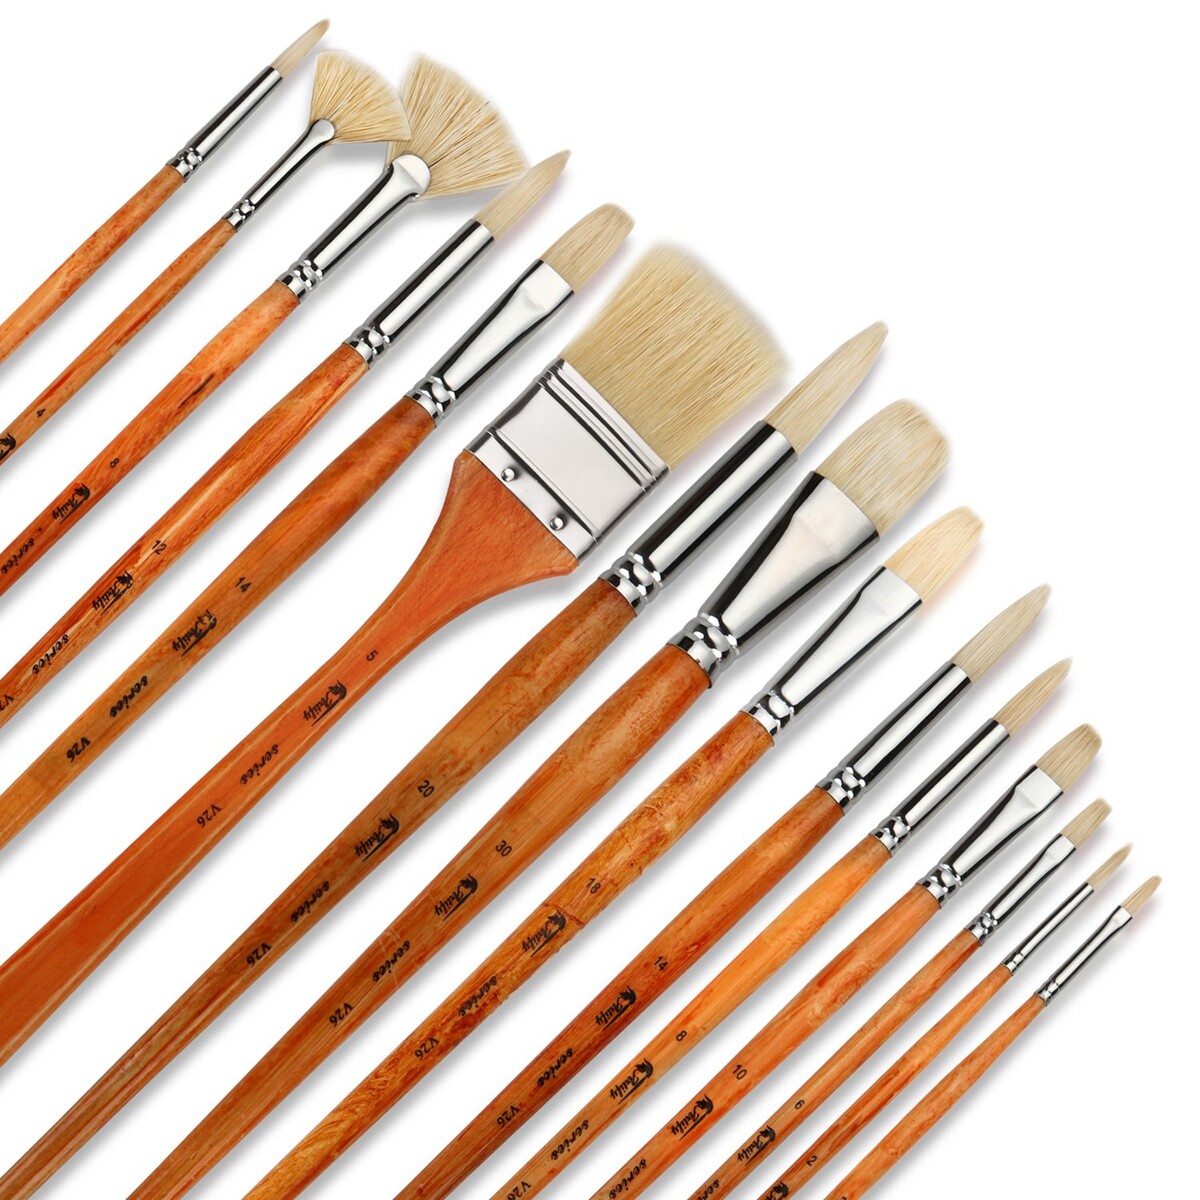 Bates- Paint Brushes, 4 Pack, Vibrant Plastic Handle, Paint Brushes for  Walls, Stain Brush, Wall Paint Brushes, Paint Brush, Furniture Paint Brush